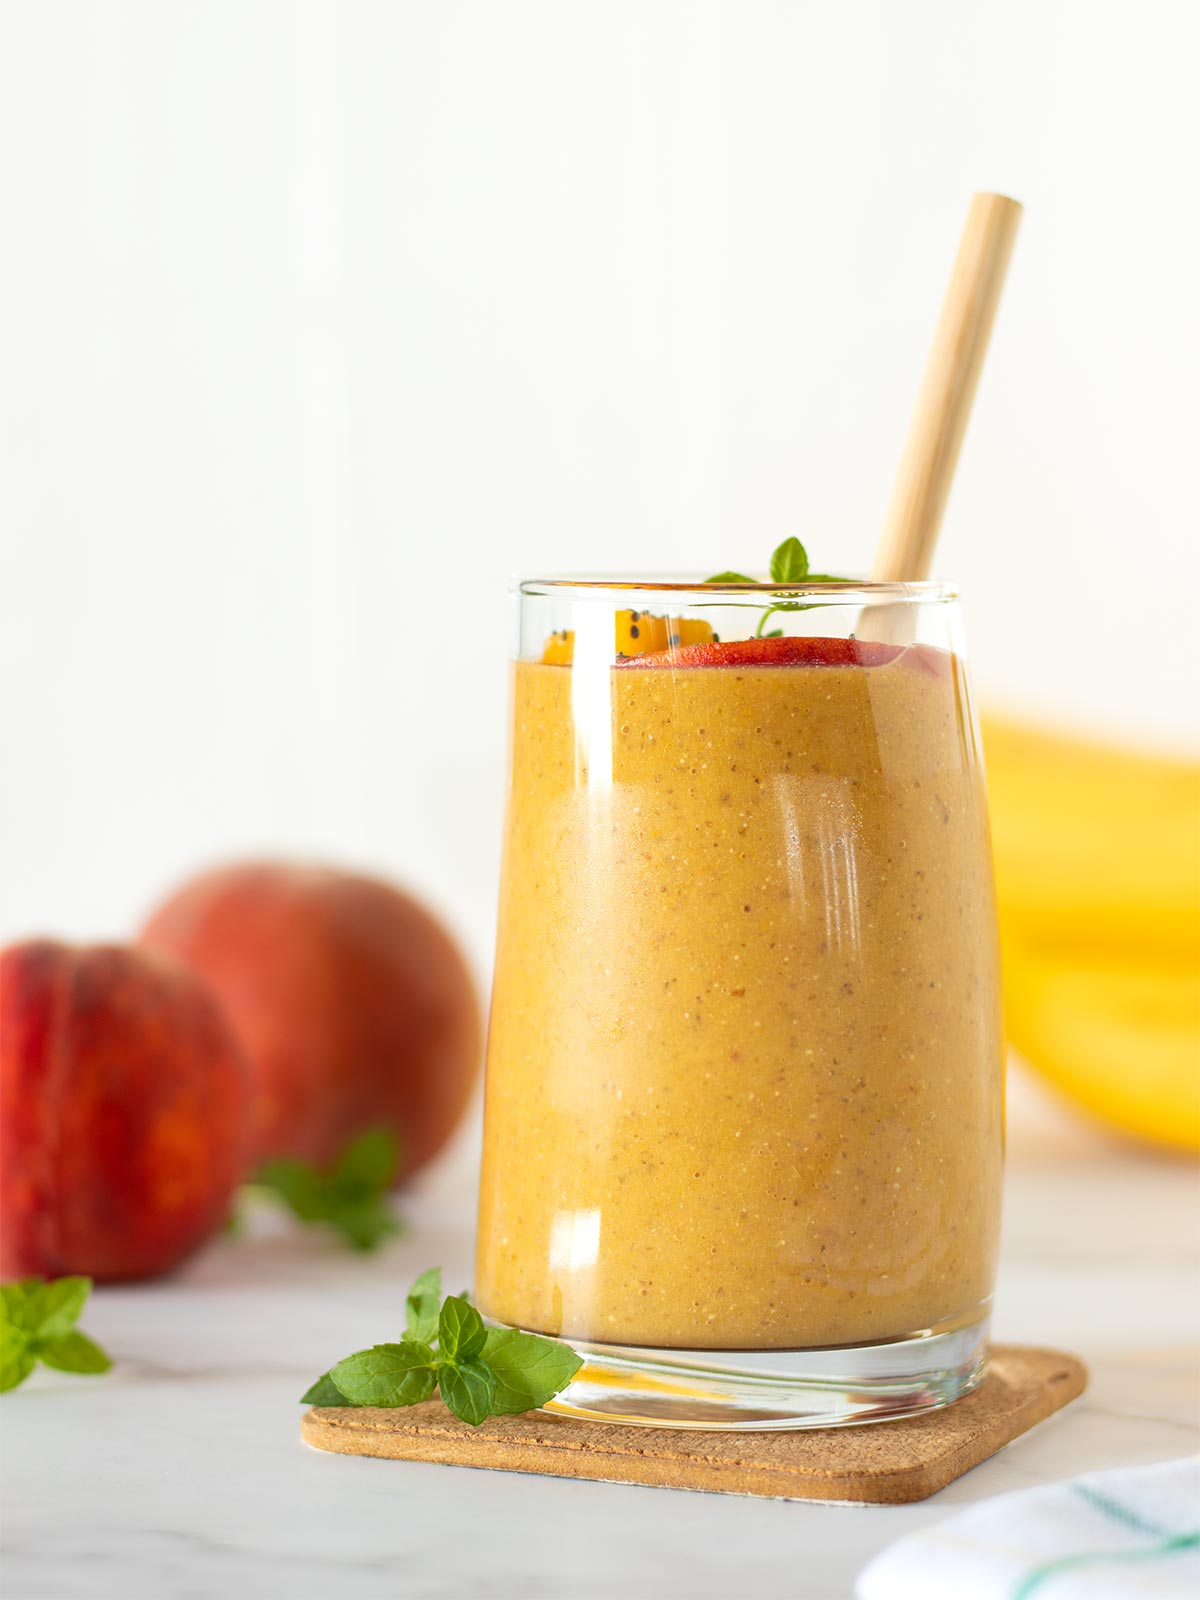 Banana peach almond milk smoothie with chia seeds and turmeric powder in a glass with bamboo straw.